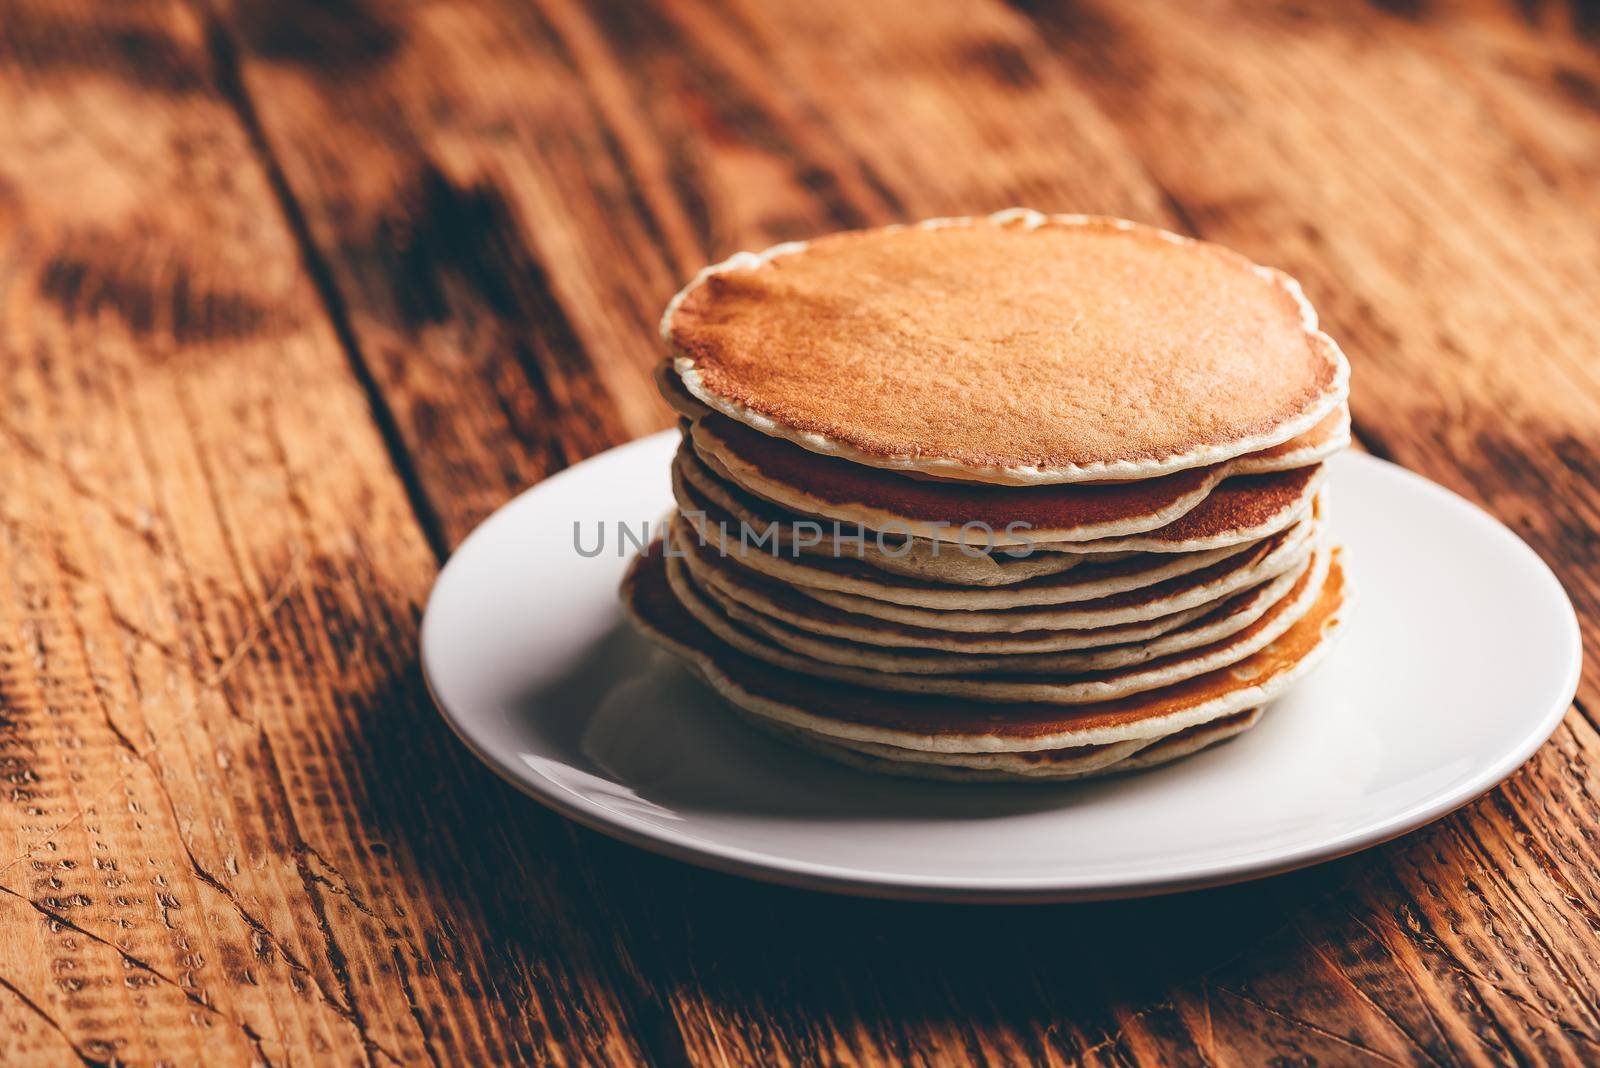 Stack of american pancakes on white plate over wooden table